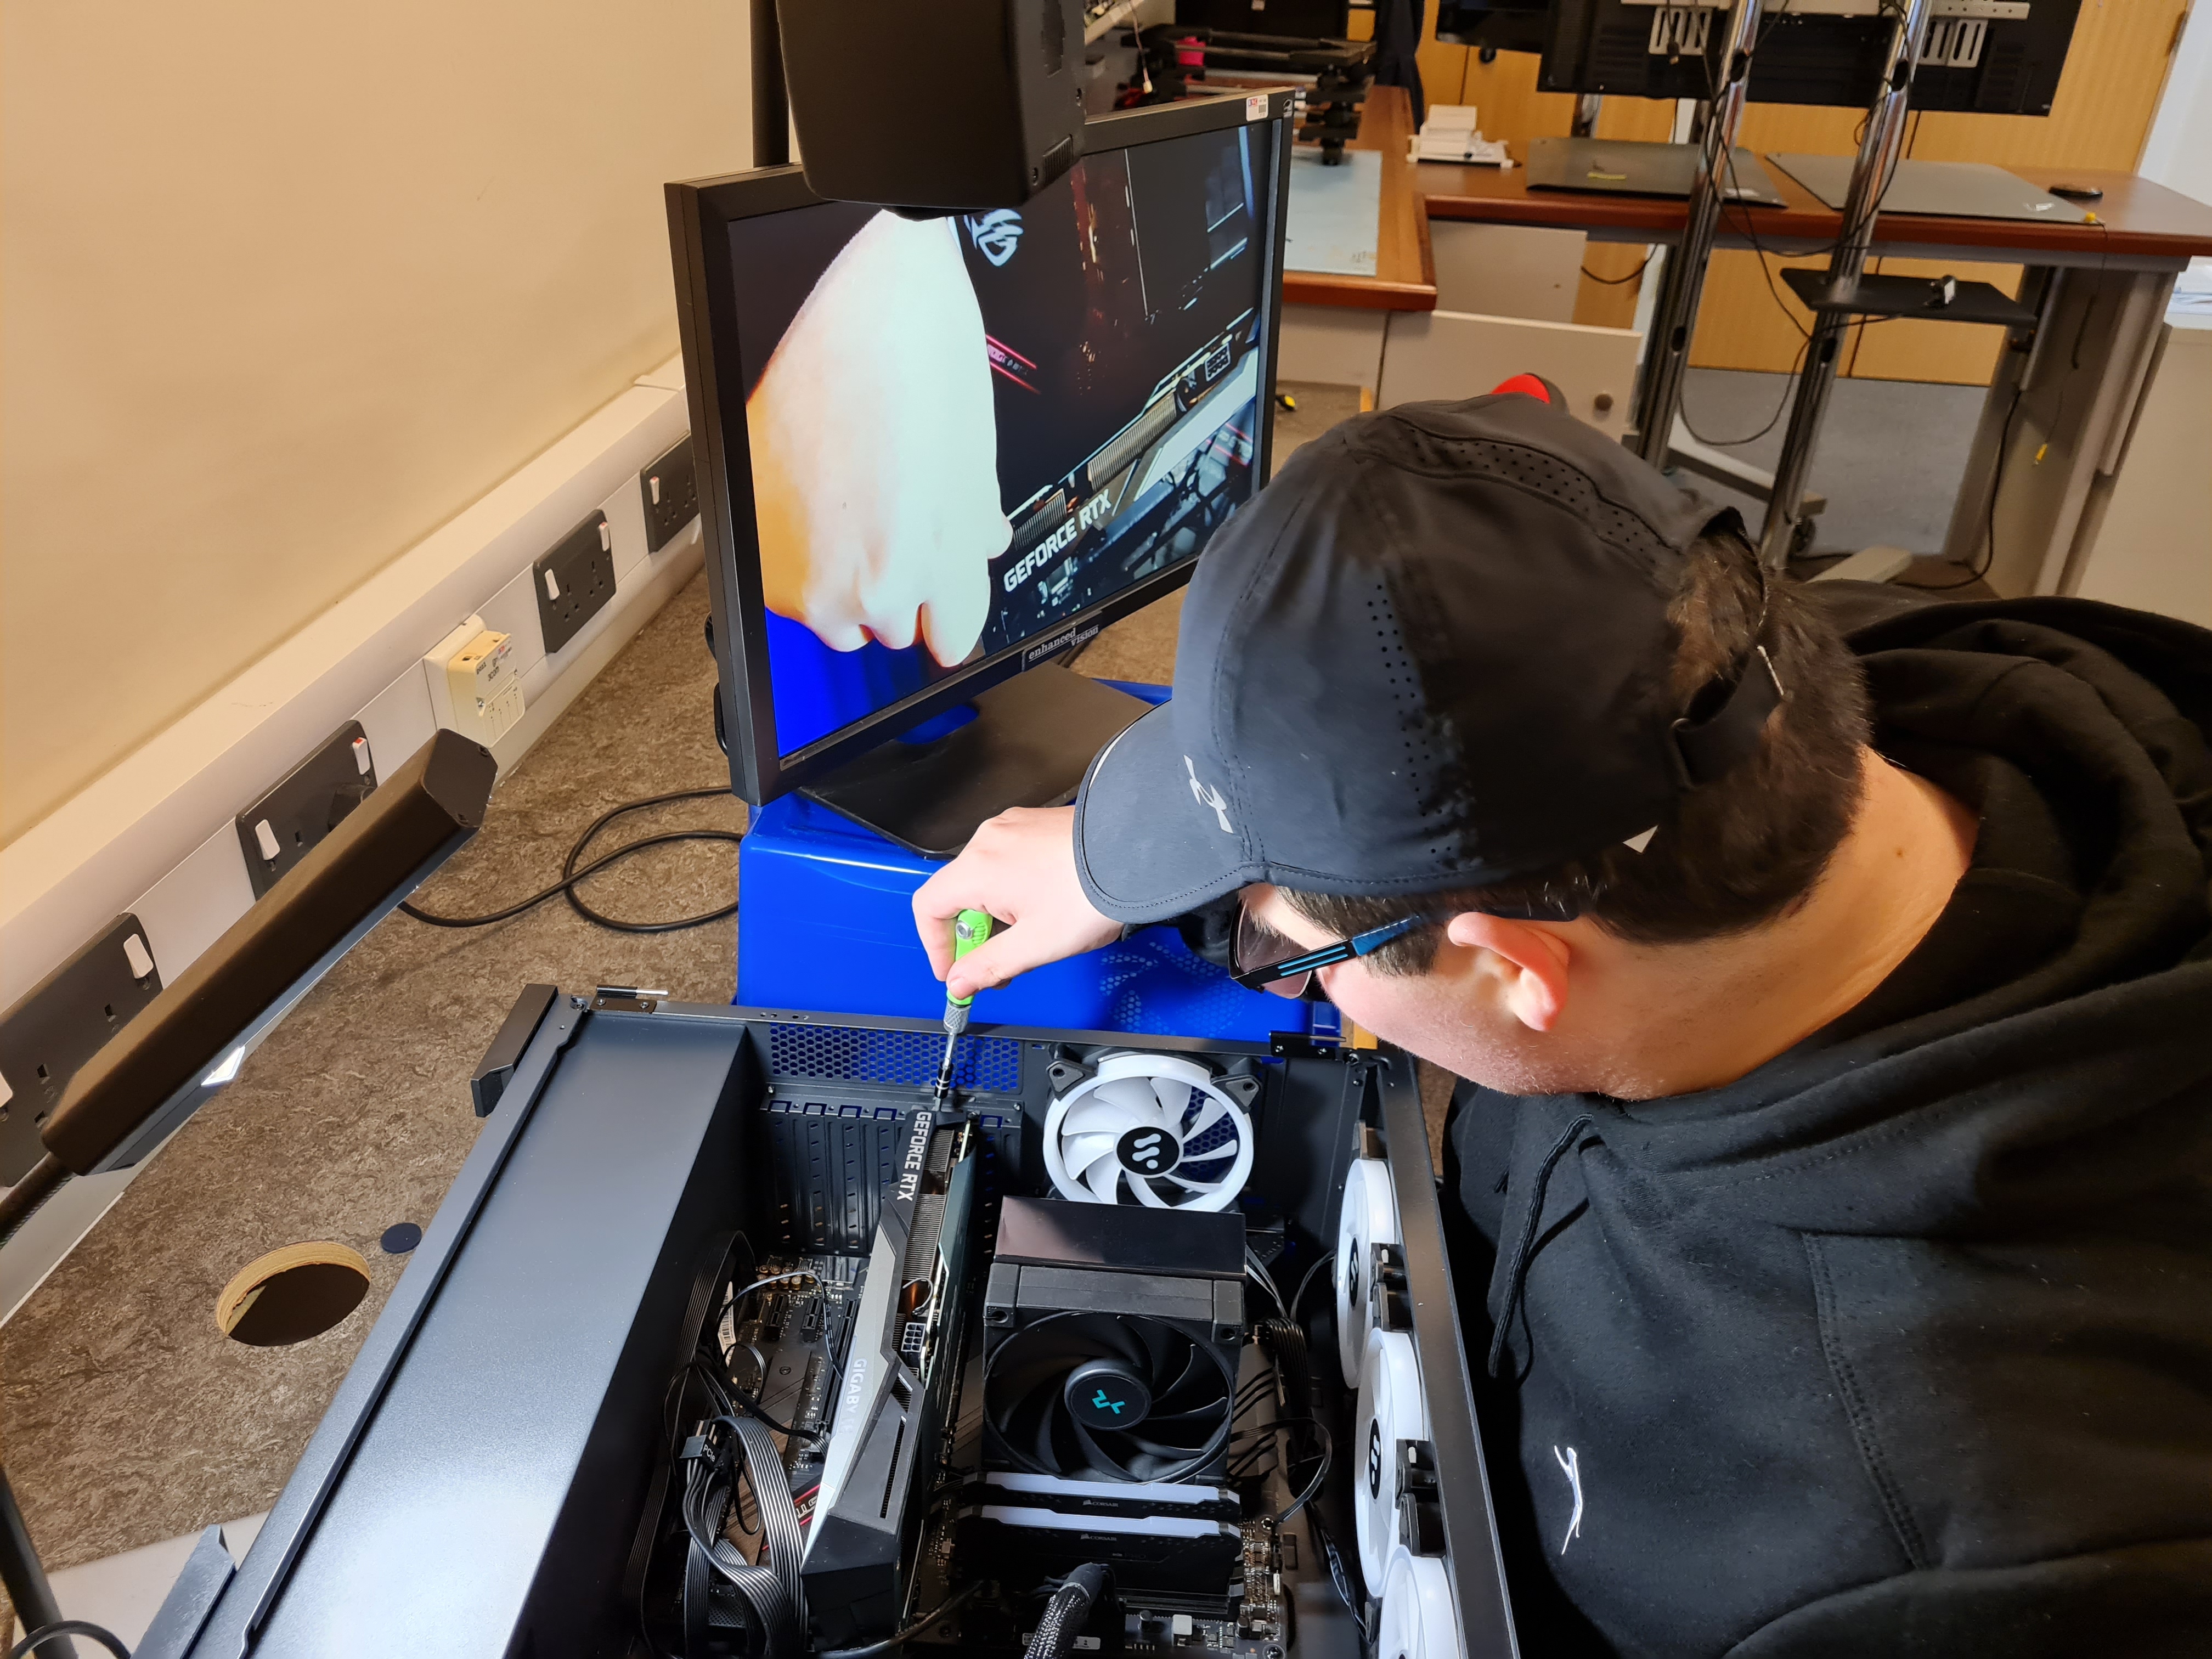 A student works on the inside of a computer box with a screwdriver - there is a magnifying monitor next to him on the right